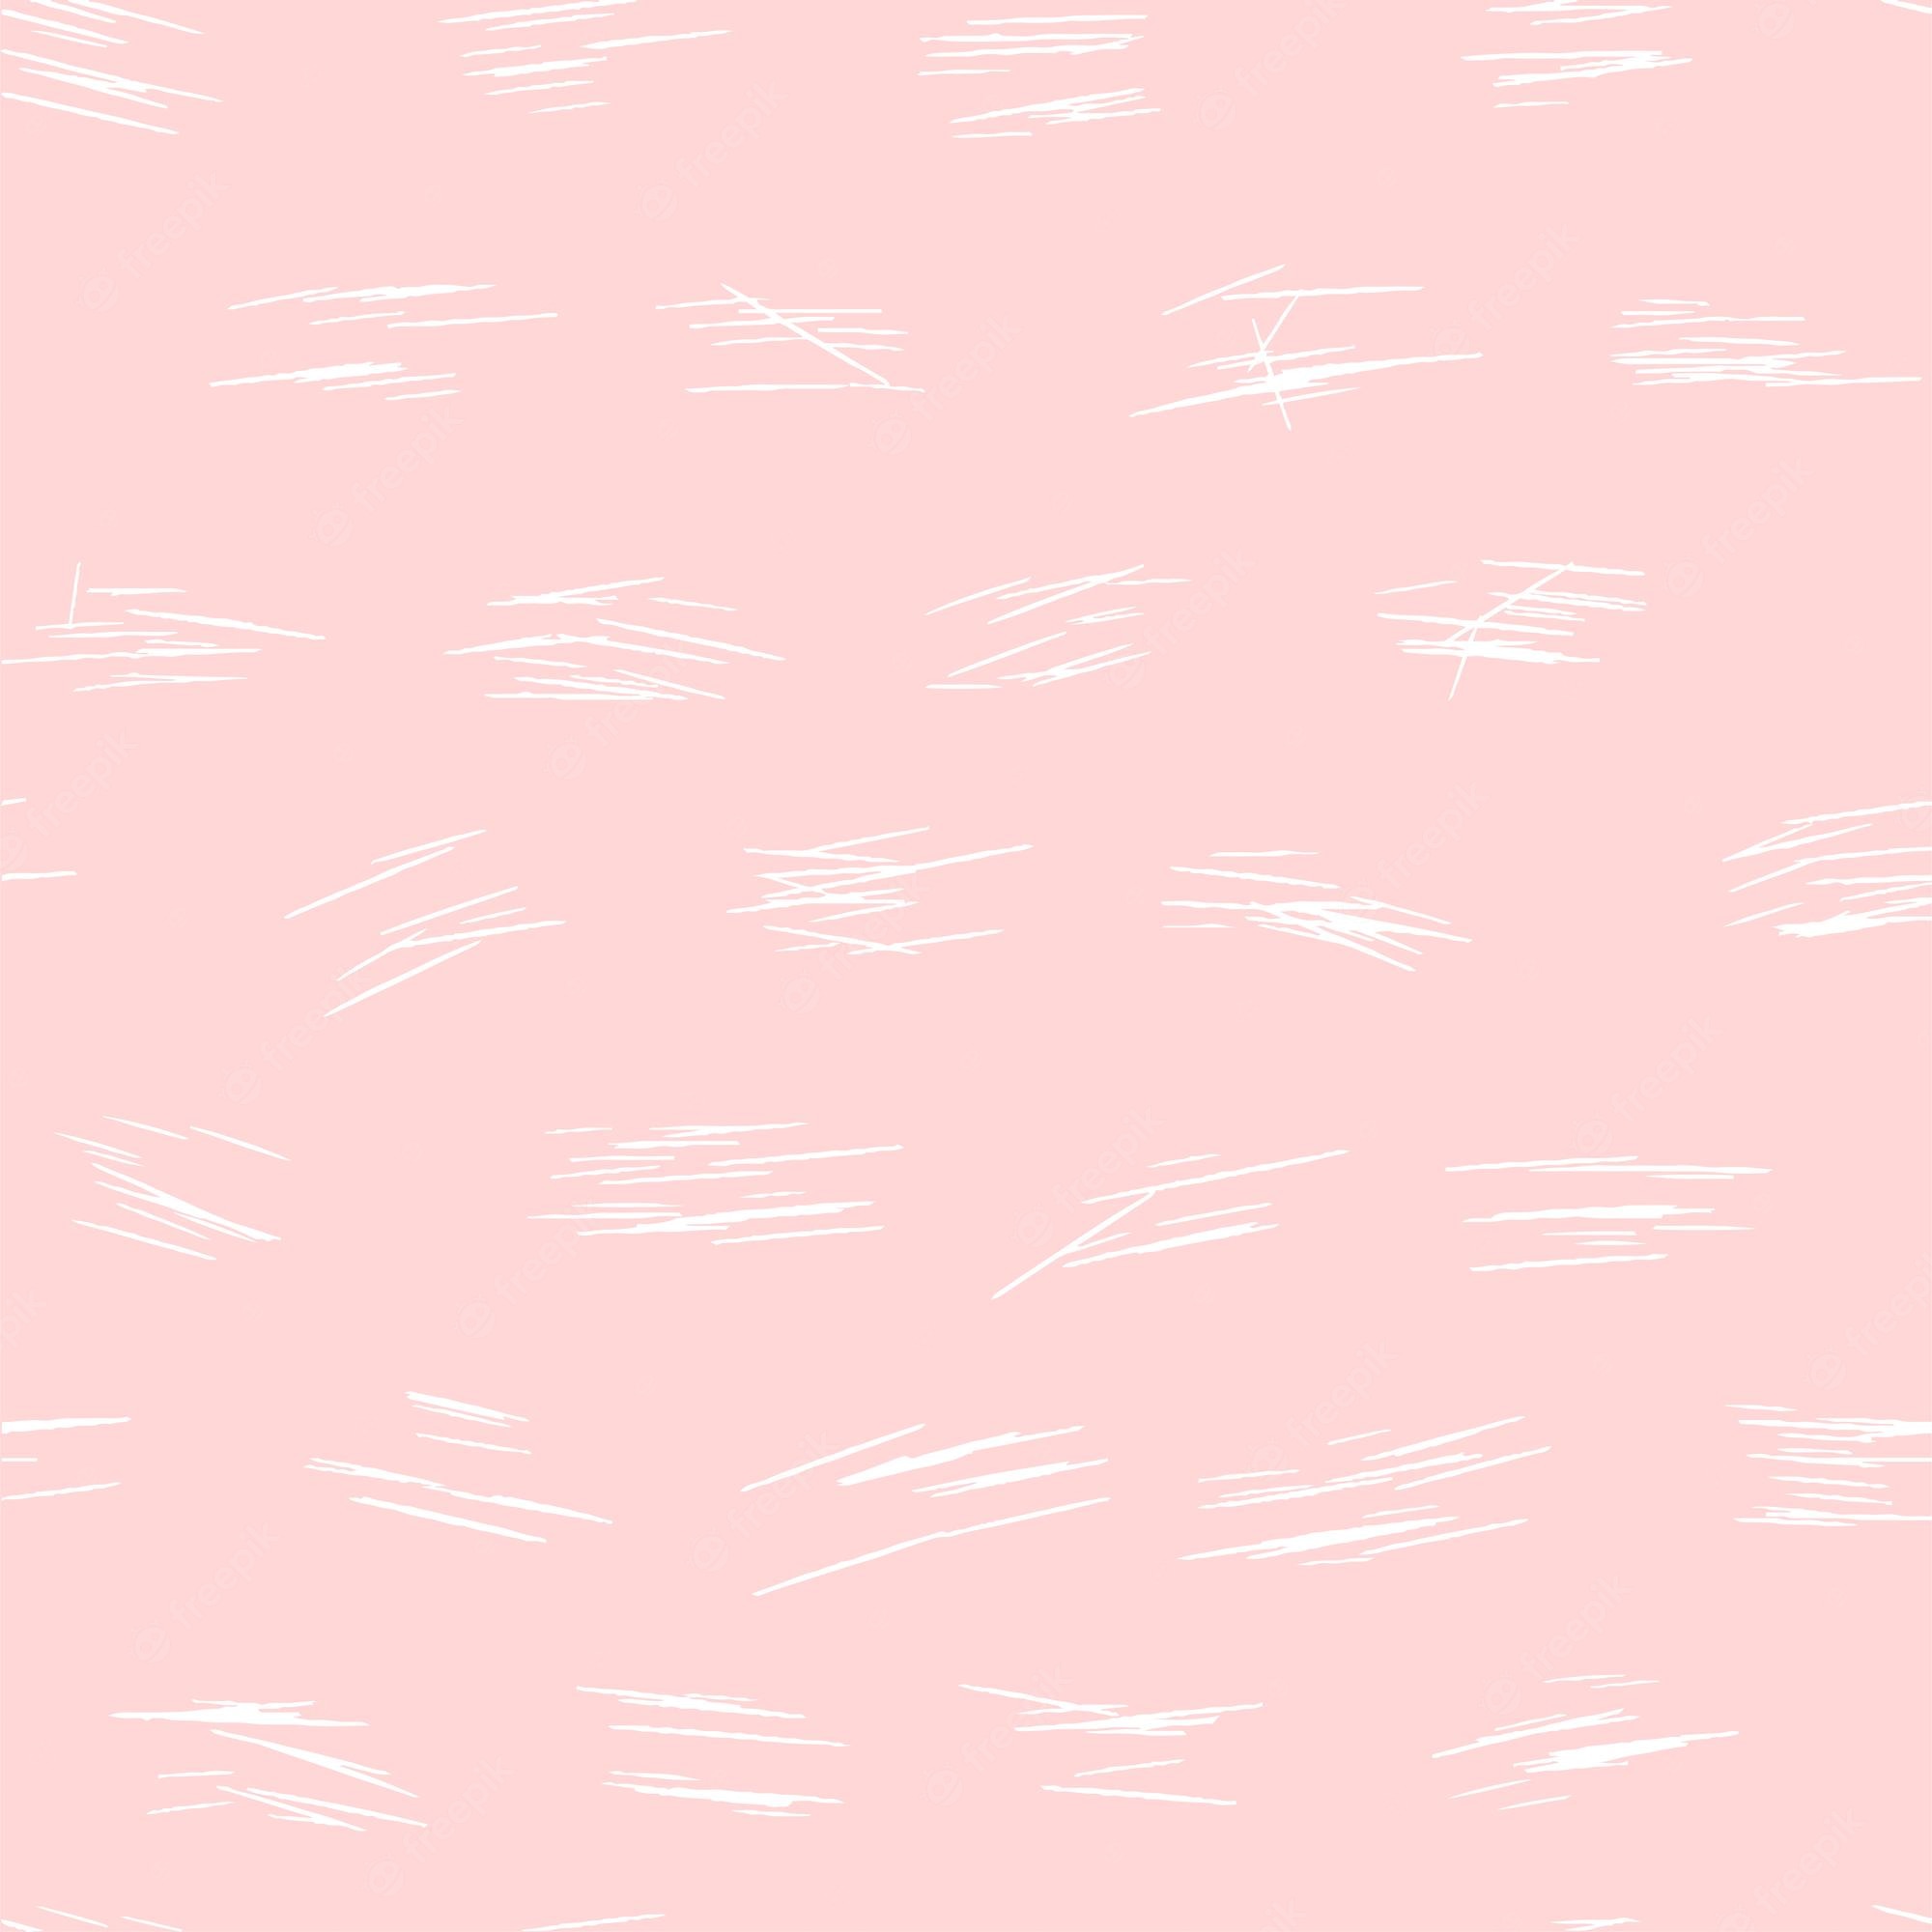 Dusty Pink Image. Free Vectors, & PSD